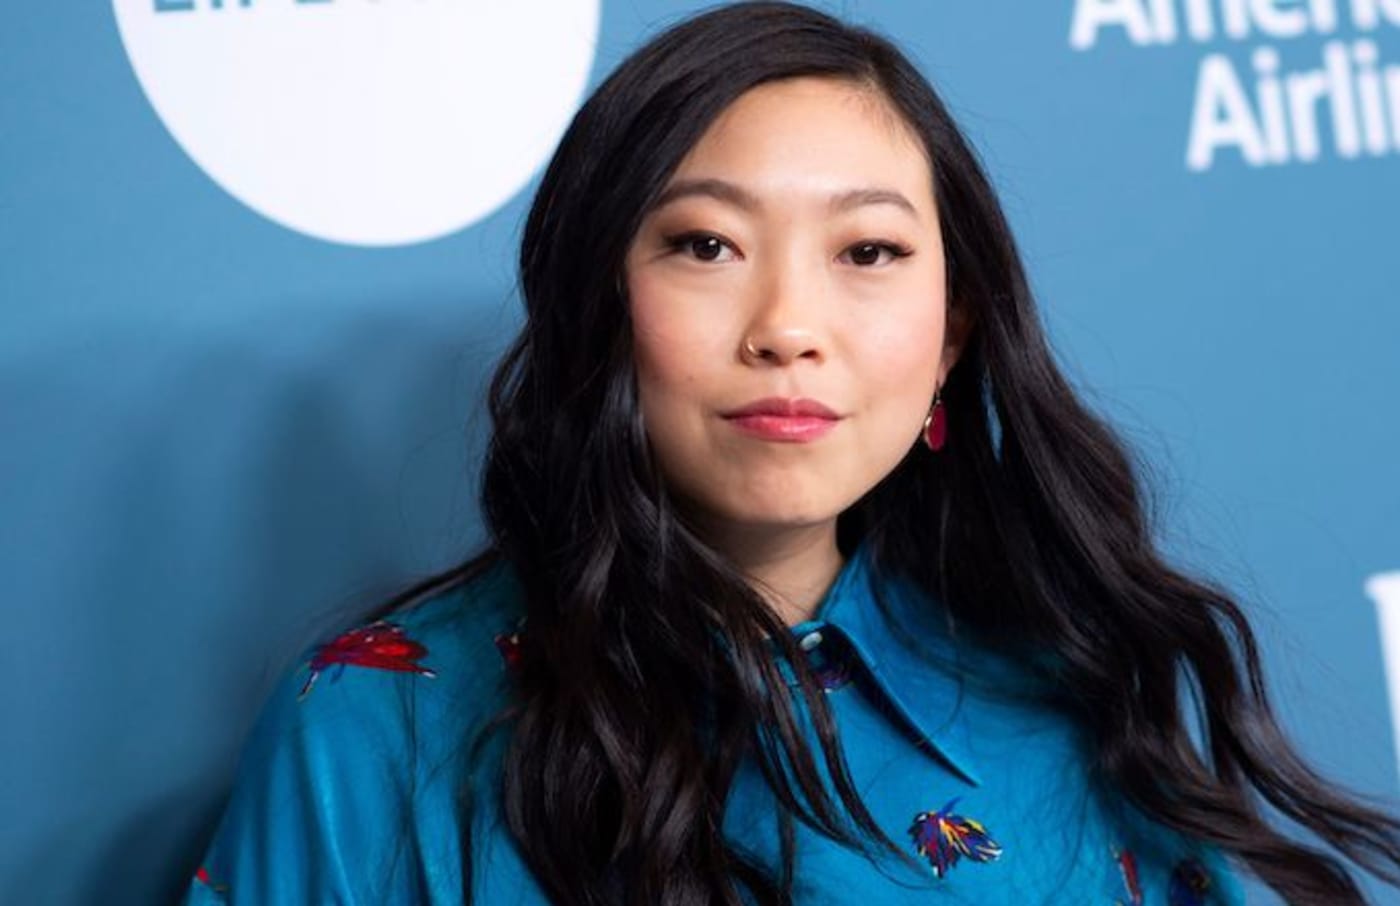 Rapper Awkwafina attends The Hollywood Reporter's Power 100 Women In Entertainment at Milk Studios.